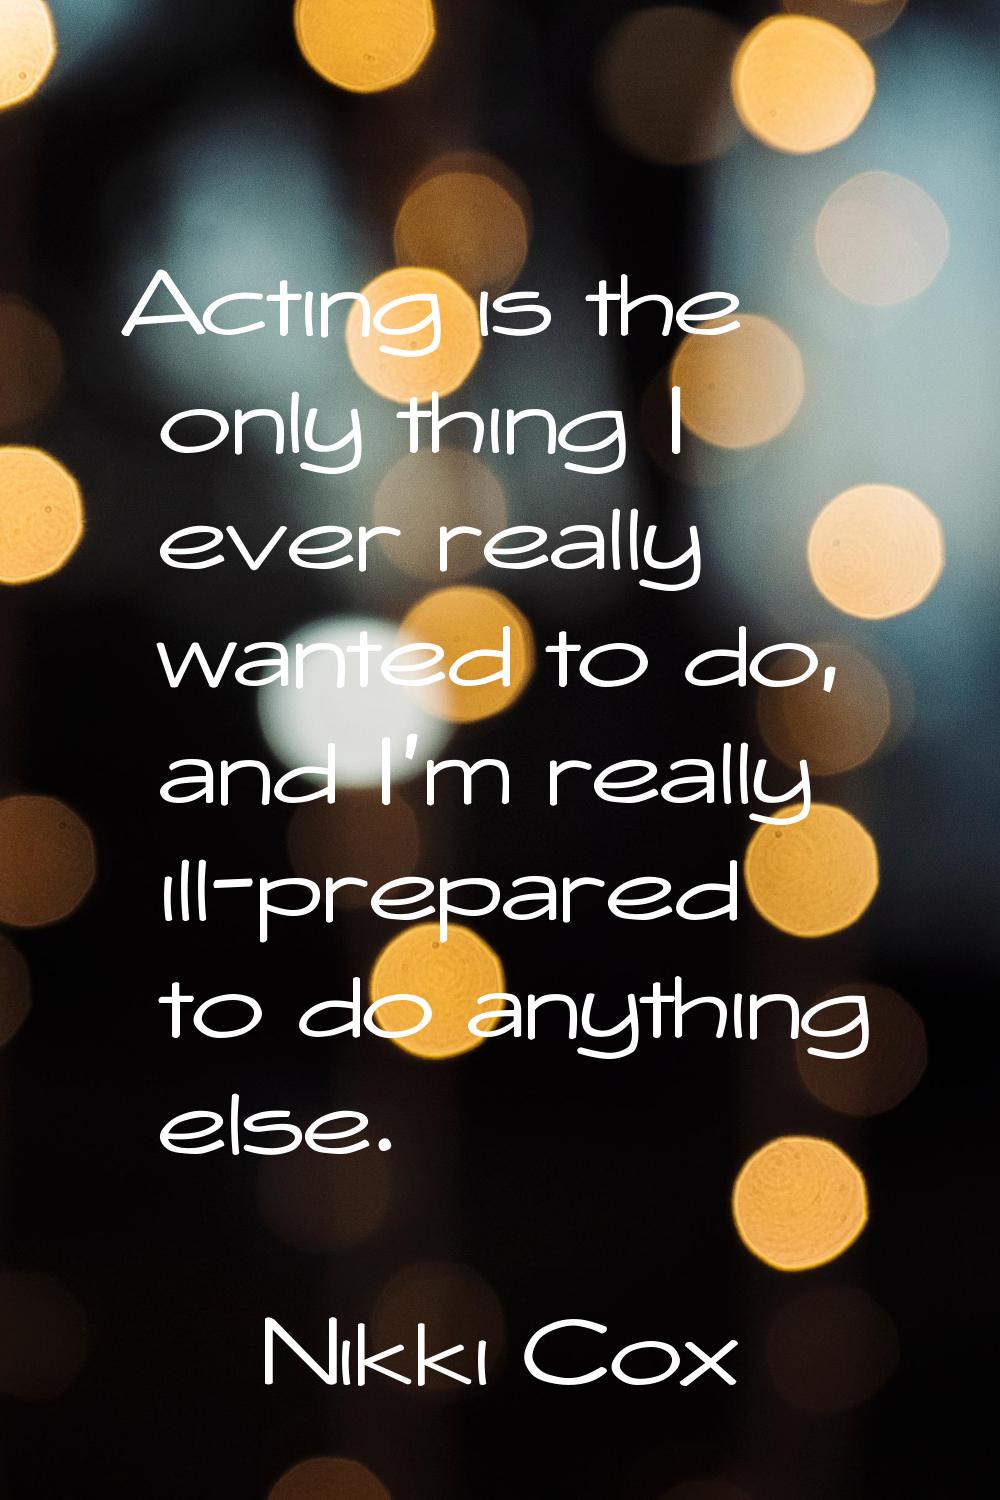 Acting is the only thing I ever really wanted to do, and I'm really ill-prepared to do anything els